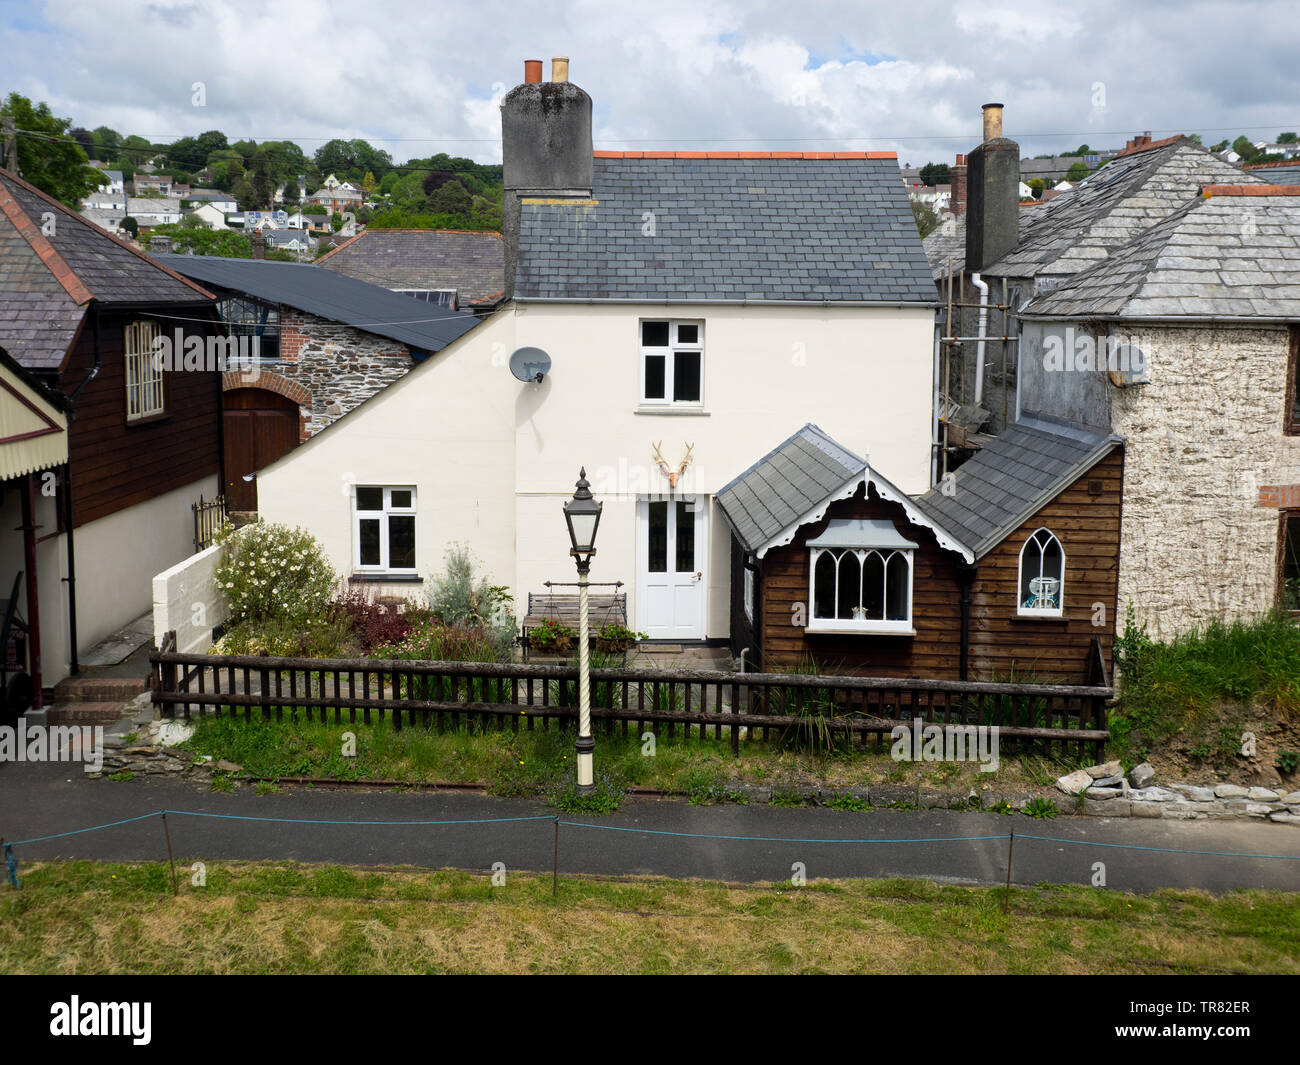 Railway cottage at Launceston steam railway, available to rent as a holiday cottage. Launceston, Cornwall, UK Stock Photo